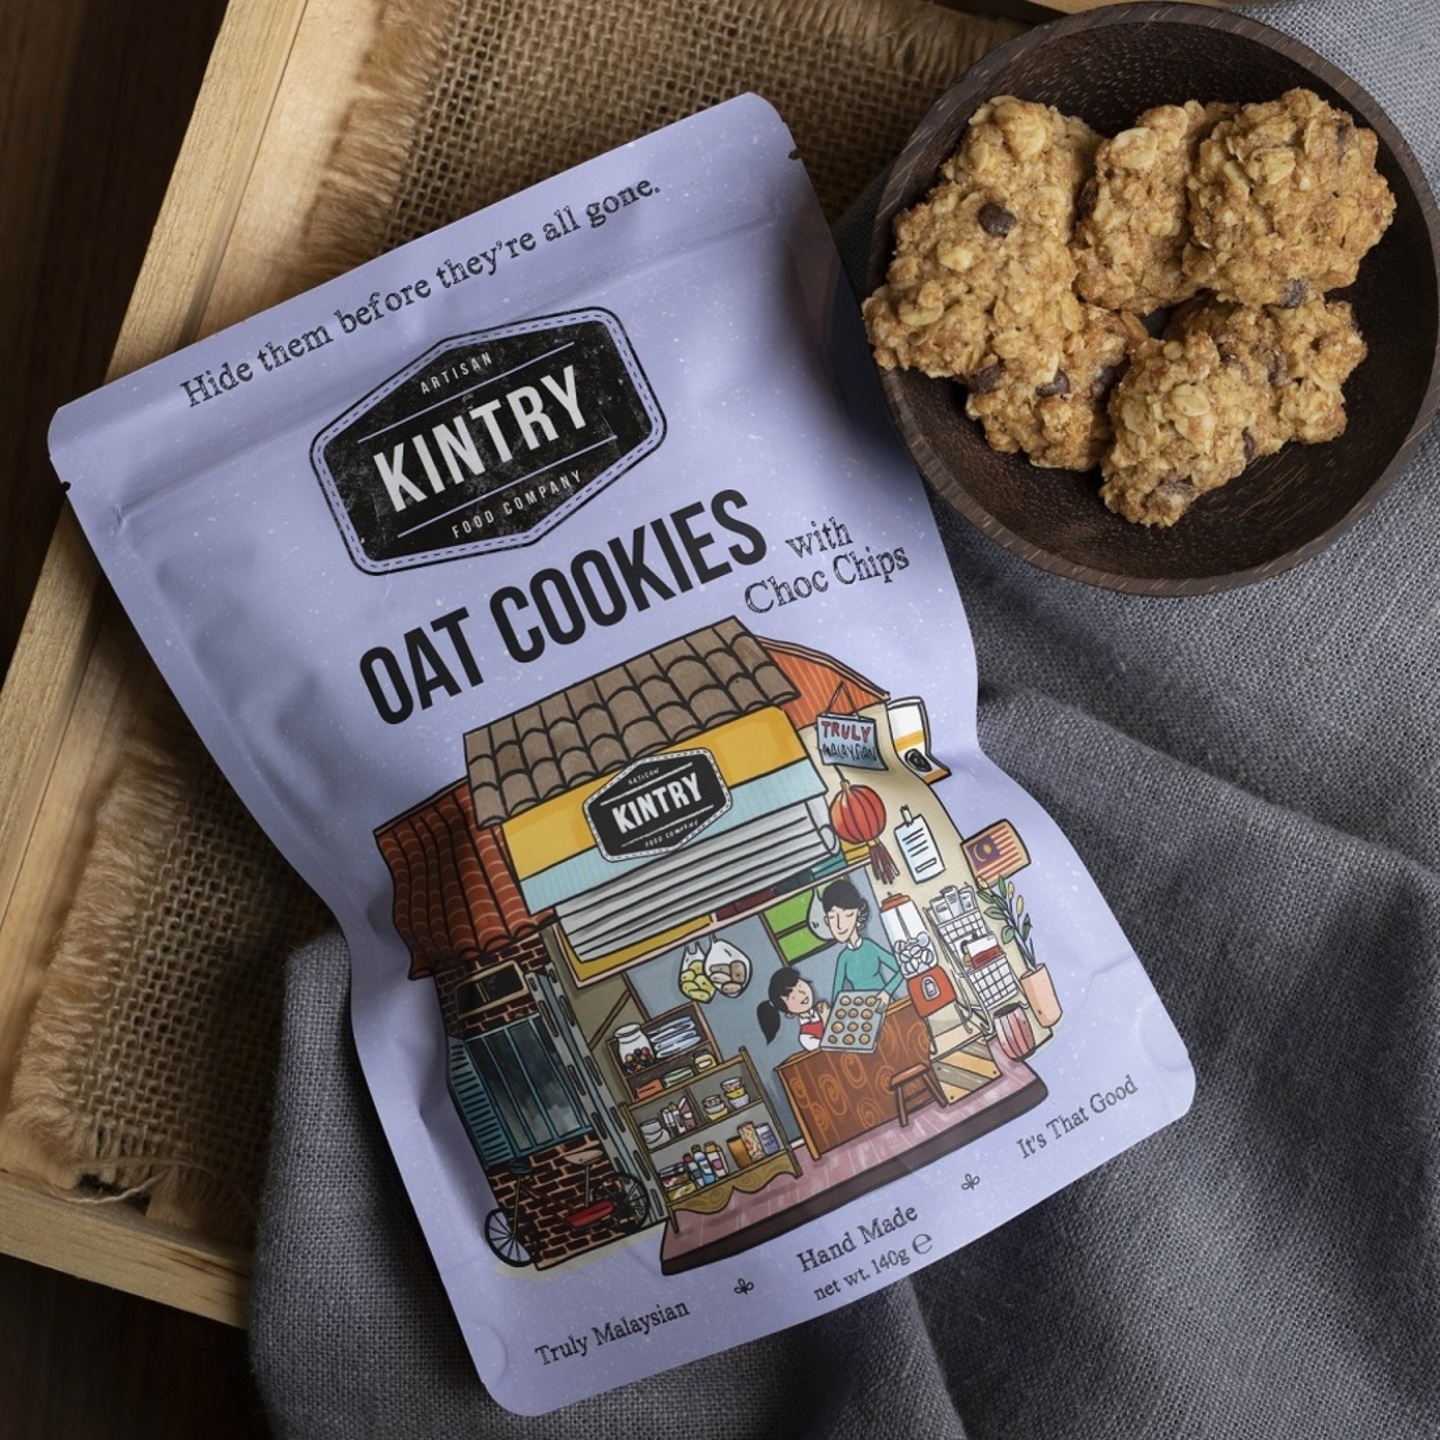 KINTRY Oat Cookies with Chocolate Chips 140g Halal